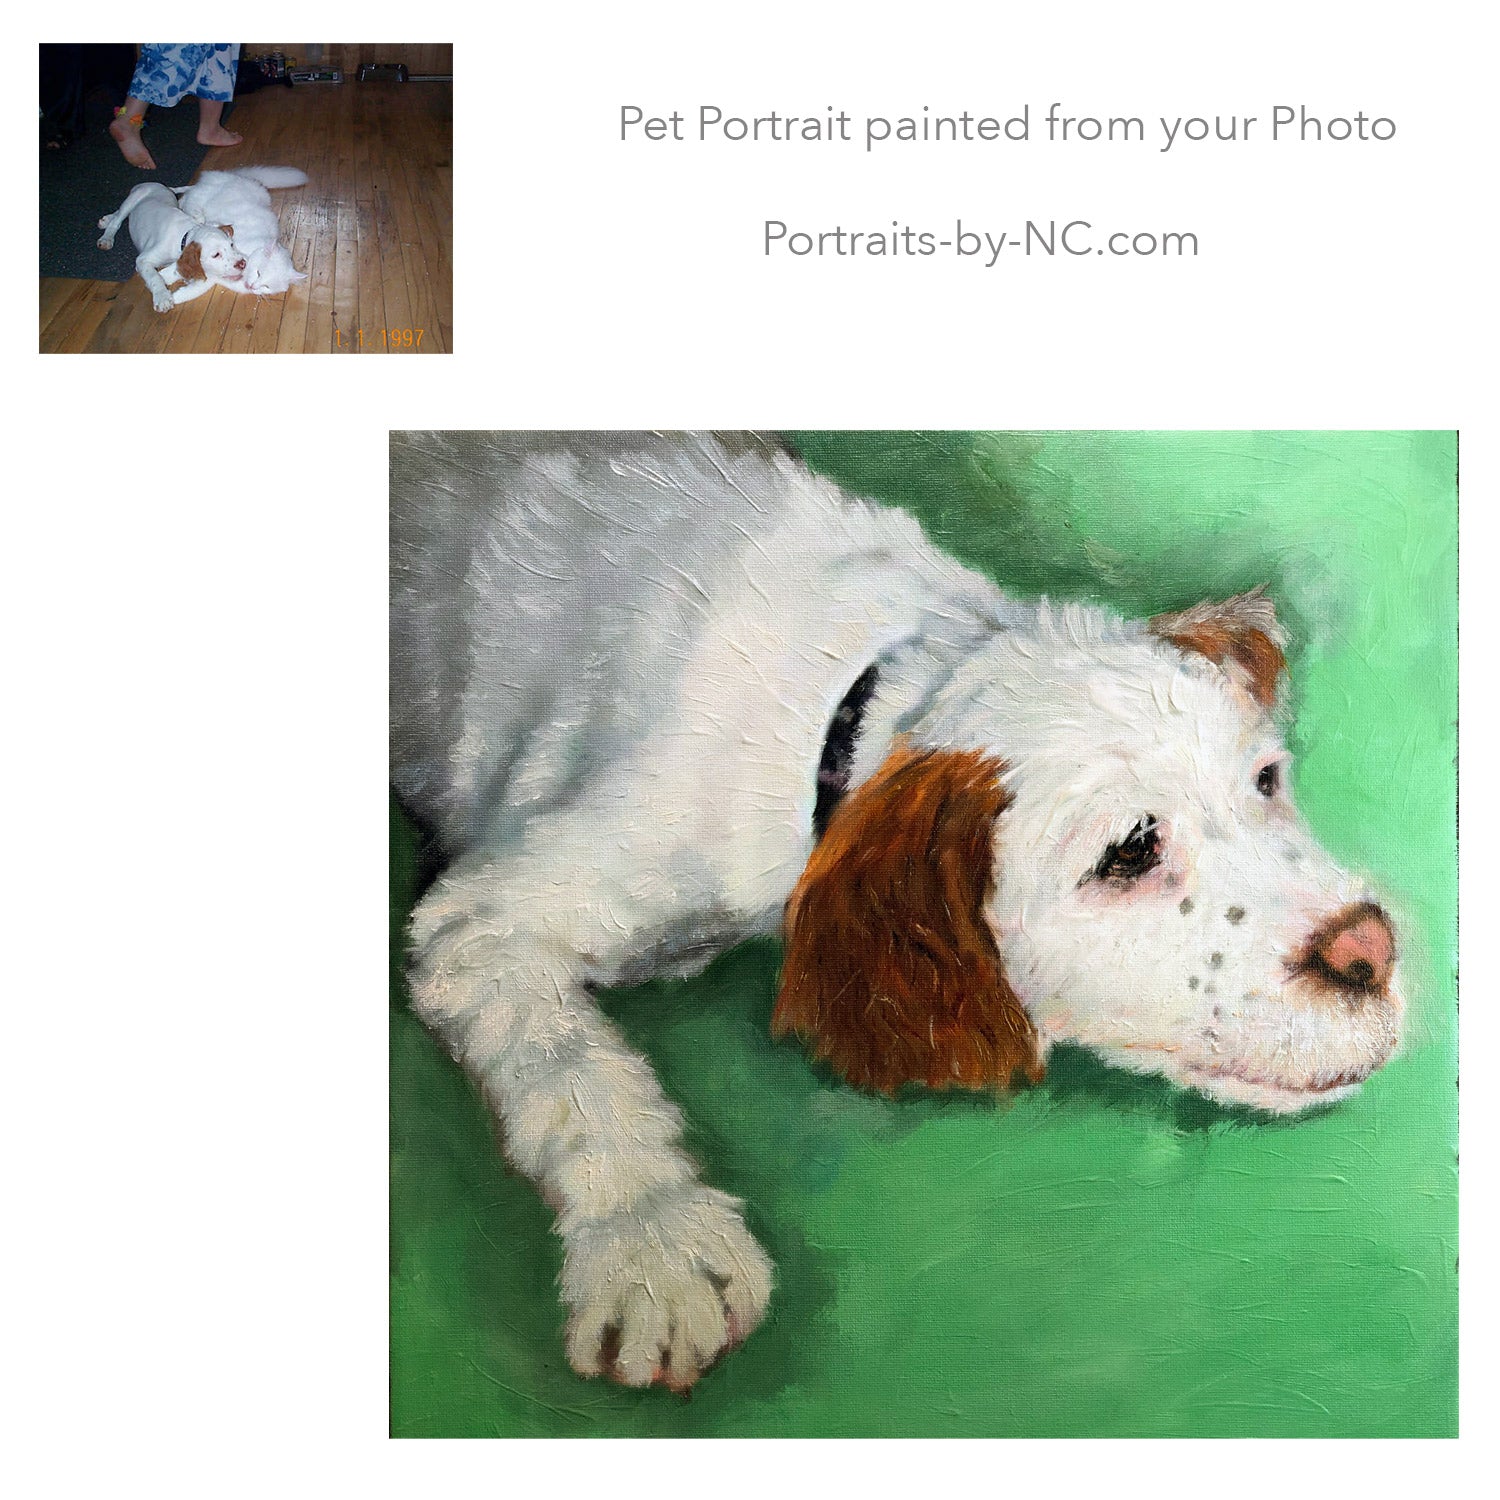 Cocker spaniel portrait painted from photo